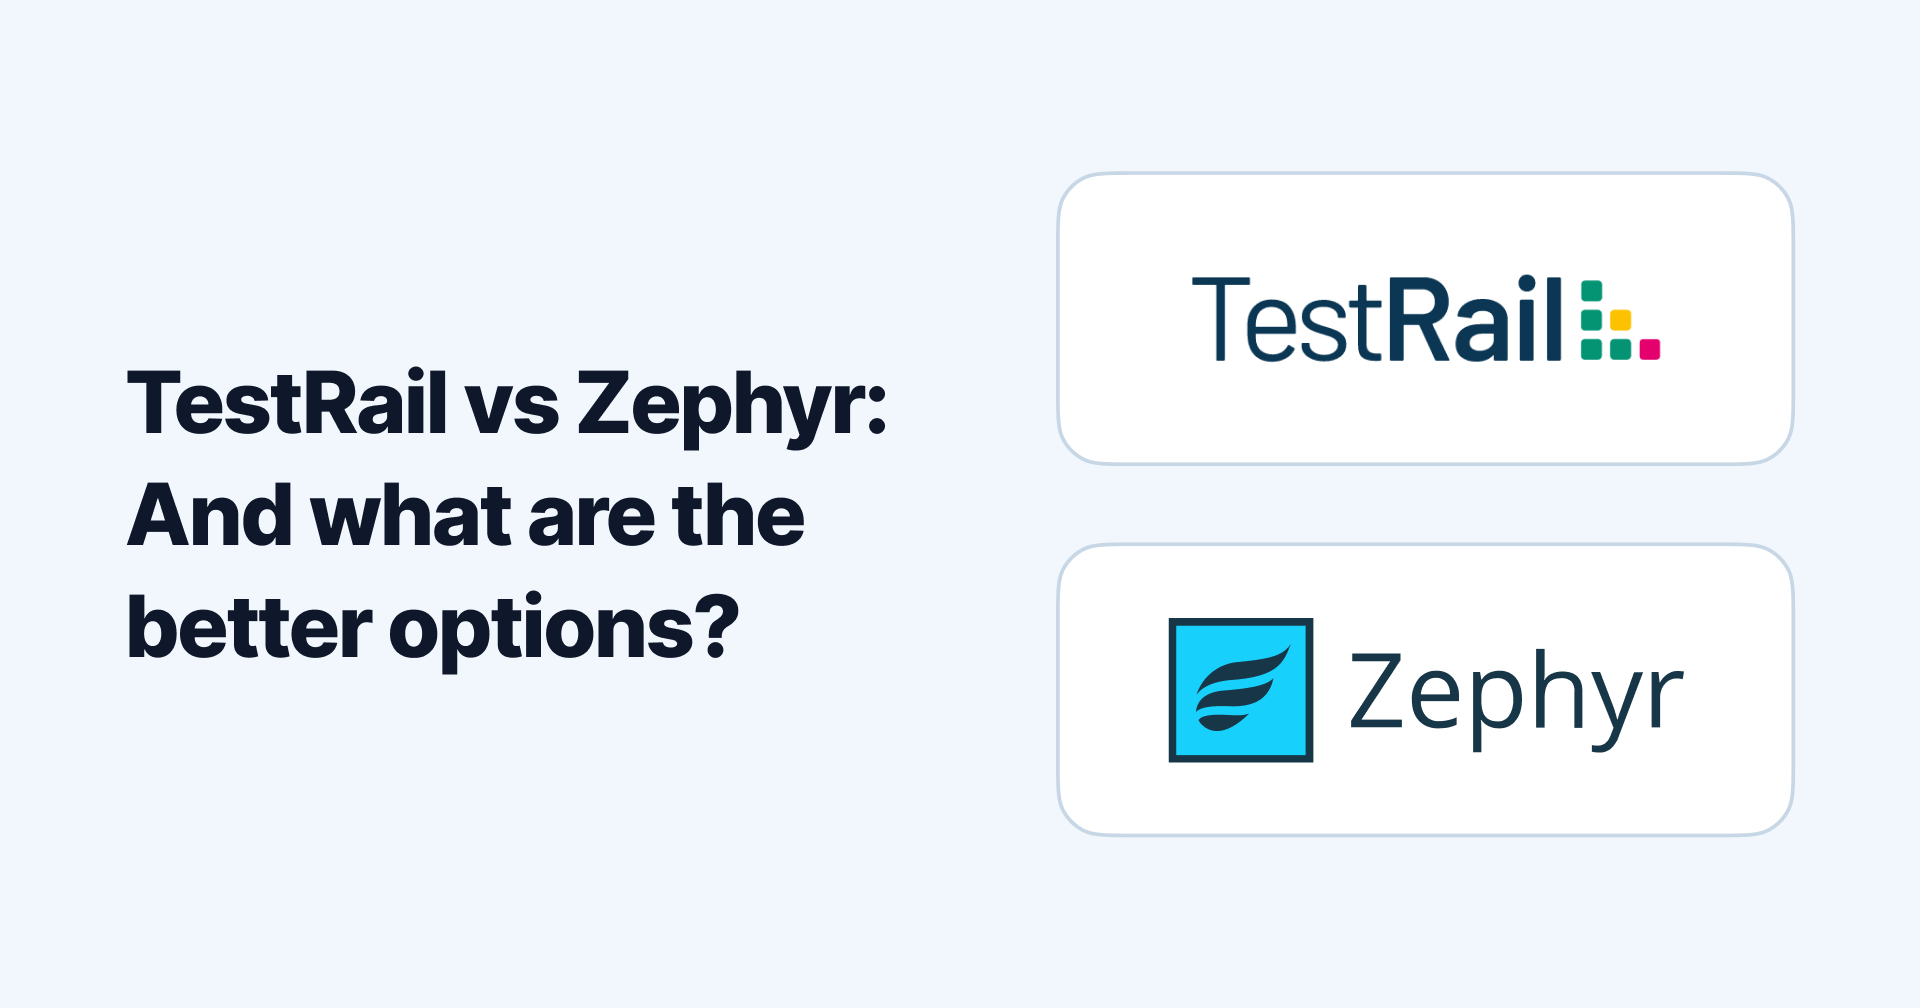 TestRail vs Zephyr: And what are the better options?